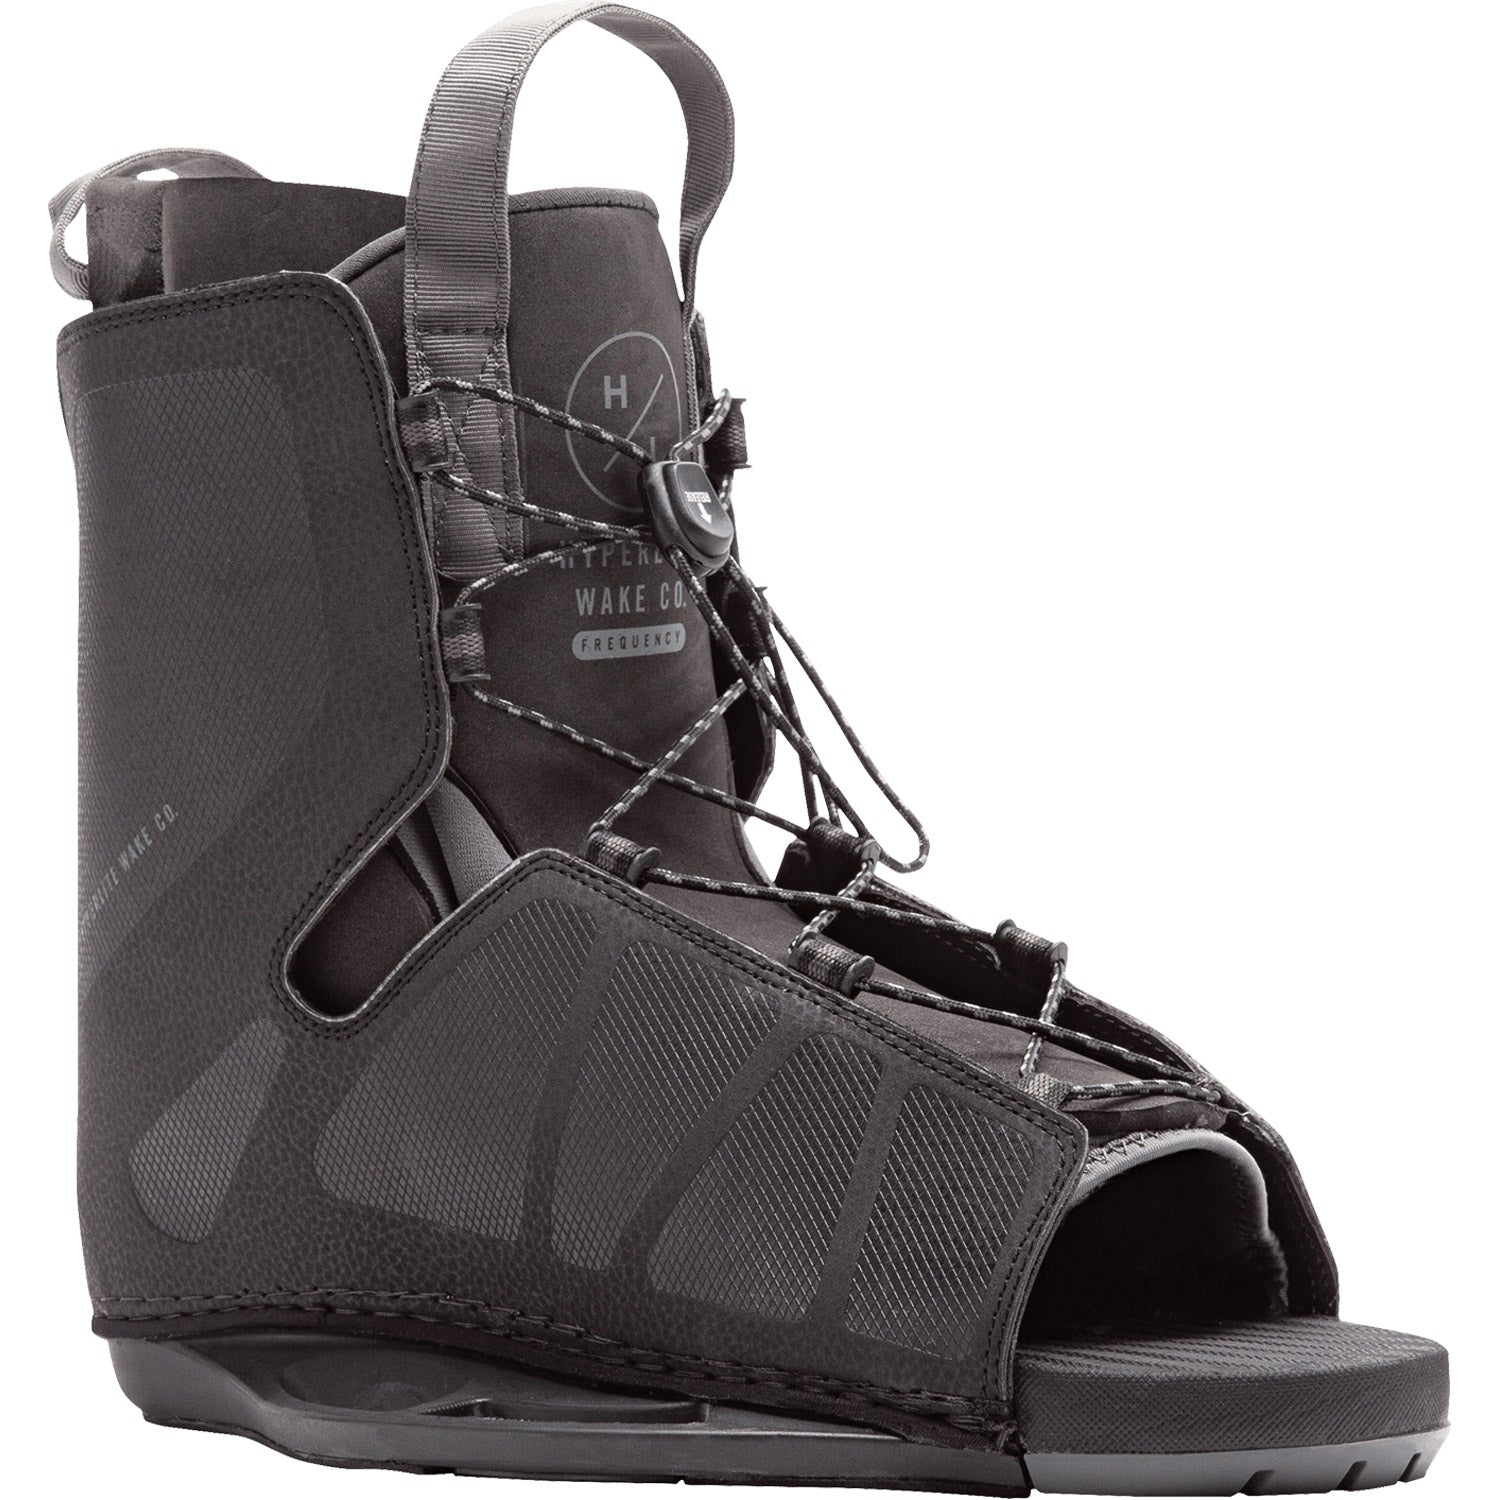 Frequency Wakeboard Boots